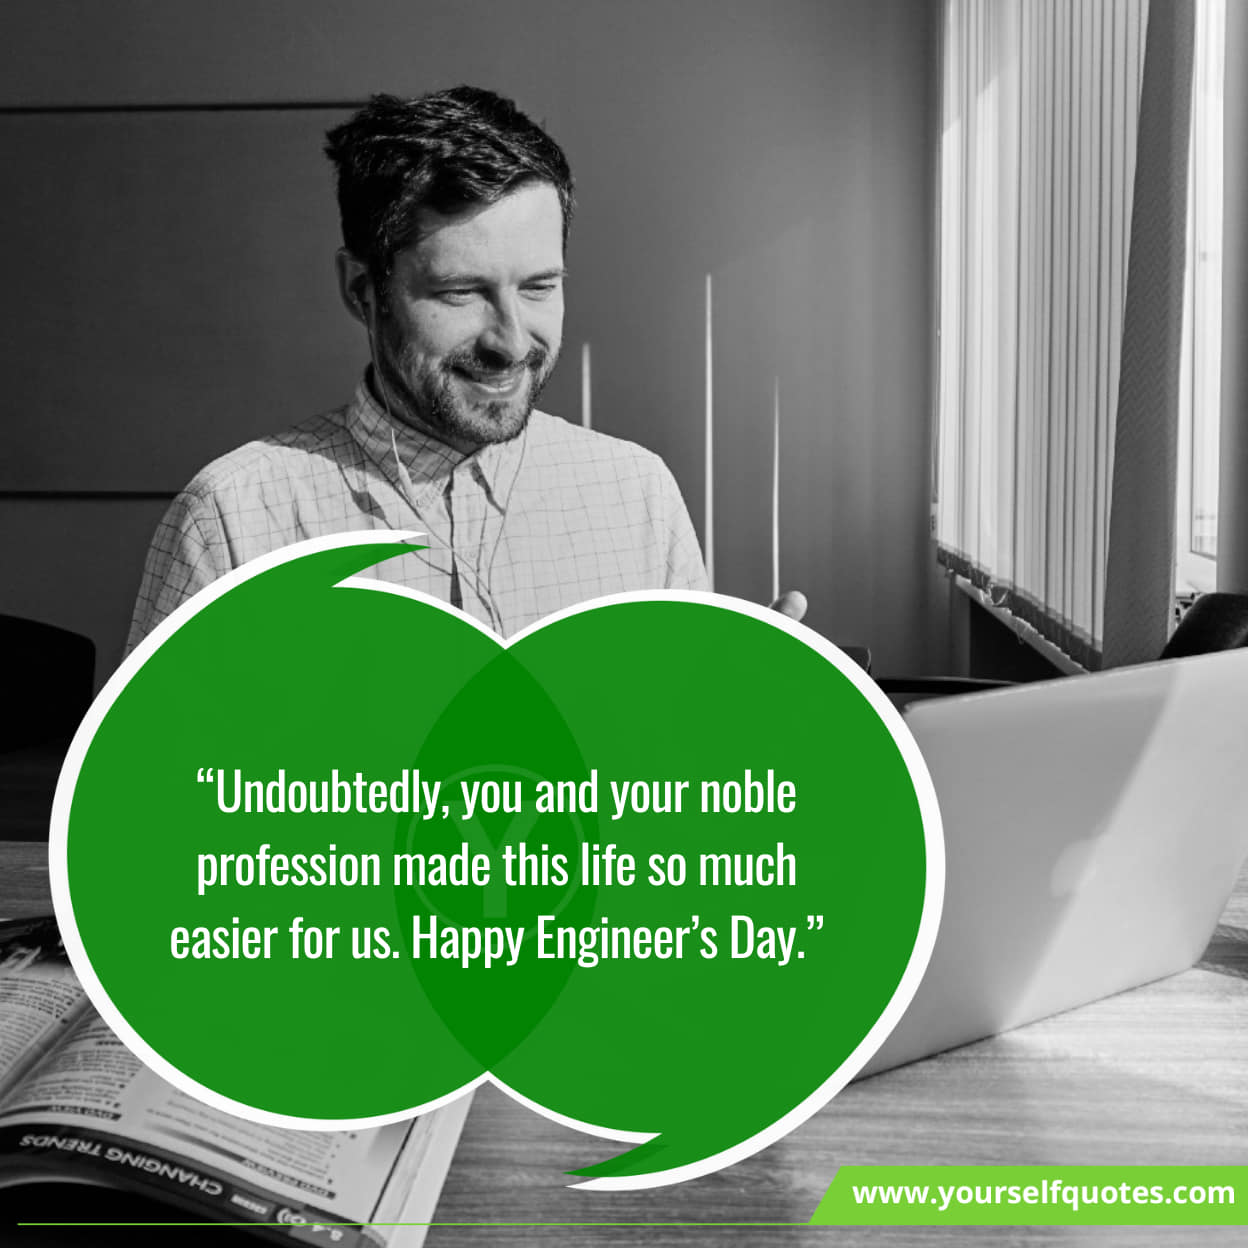 Happy Engineers Day Inspirational Messages Best